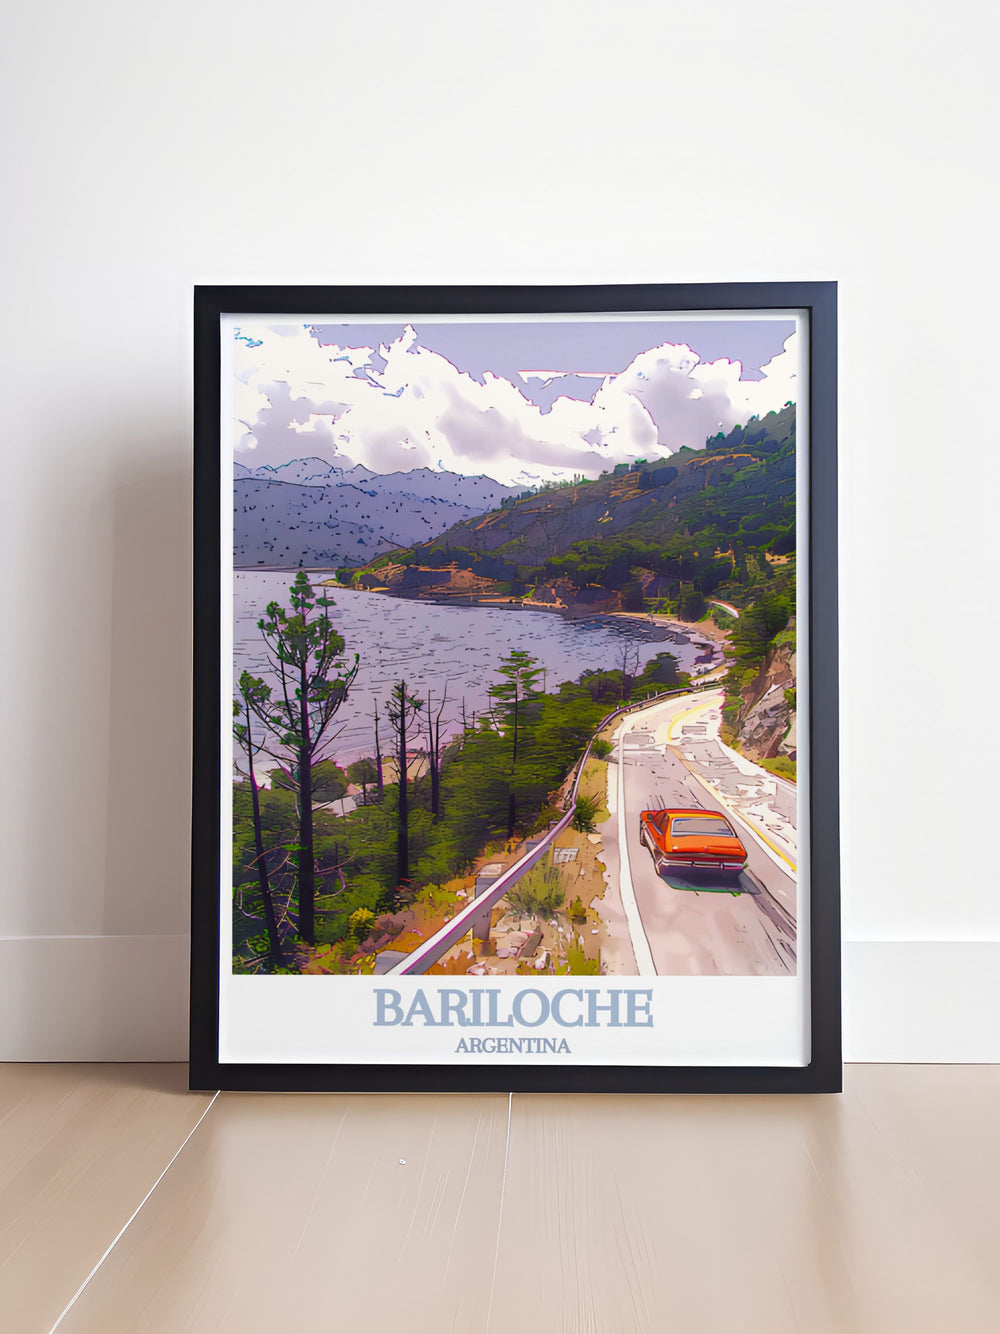 Beautiful Argentina print showcasing San Carlos de Bariloches Route of the Seven Lakes, highlighting its crystal clear waters and the majestic Andes. Ideal for those who love travel art and adding a scenic touch to their living space.